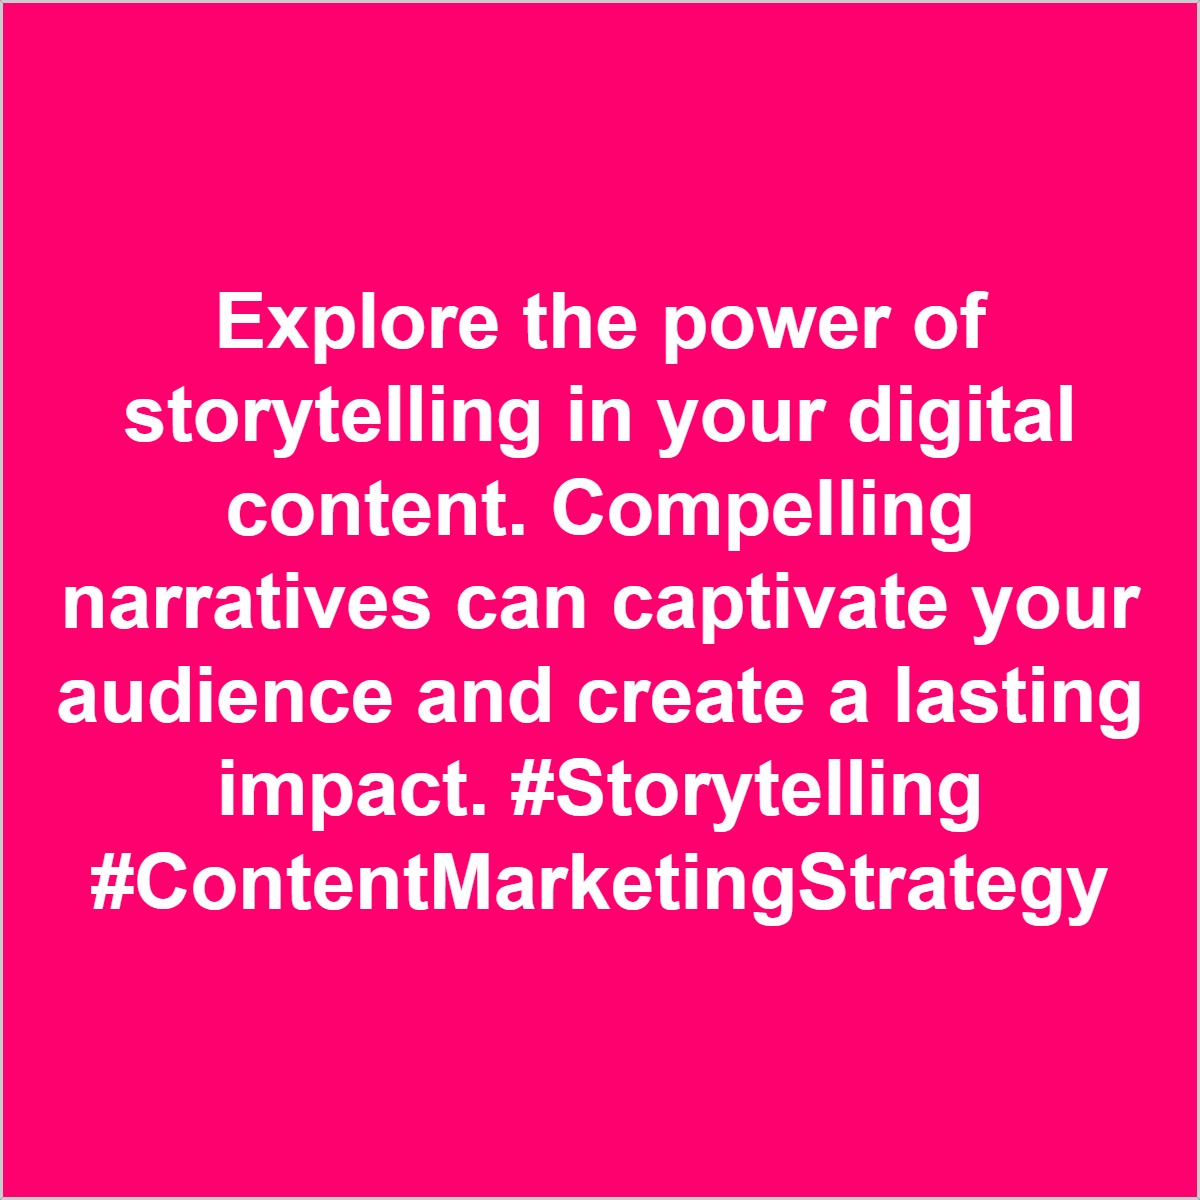 Explore the power of storytelling in your digital content. Compelling narratives can captivate your audience and create a lasting impact. #Storytelling #ContentMarketingStrategy matterhornsolutions.ca/calgary-websit…